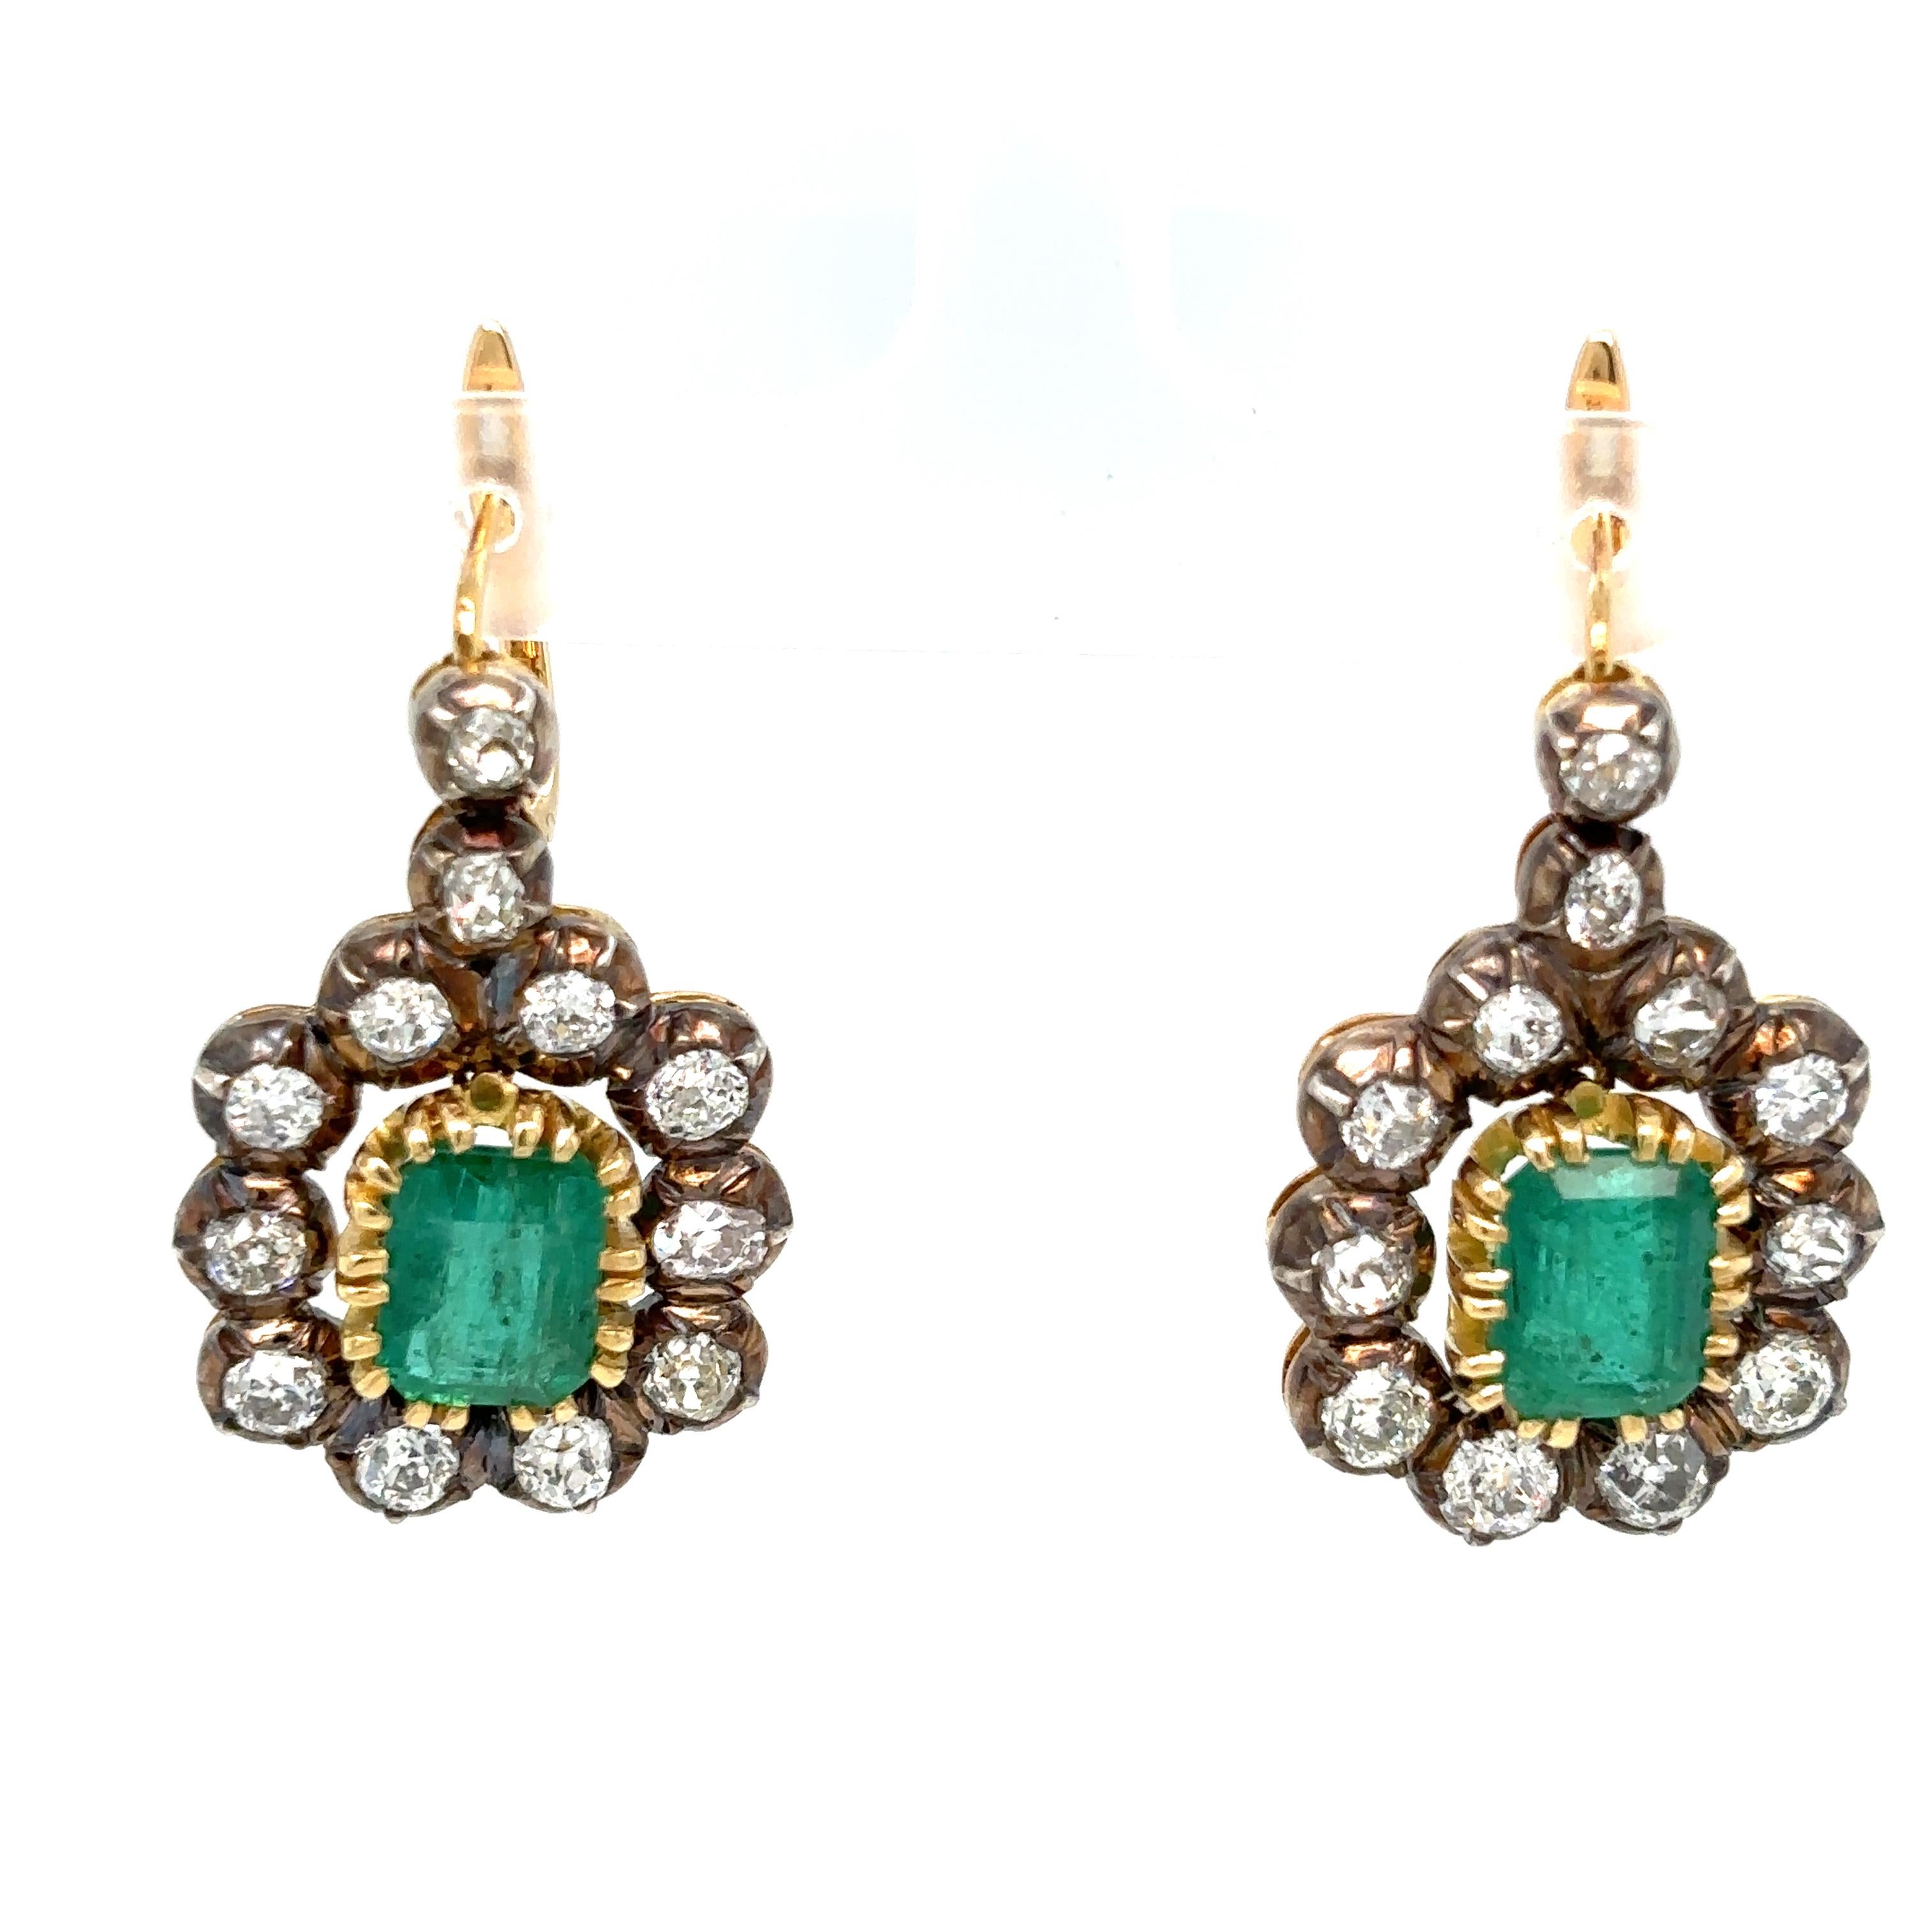 These Art Deco emerald & diamond 18k white gold and silver earrings feature 2 Natural Colombian Emeralds, weighing 2.79 + 2.26 ct, and sparkling old Mine cut diamonds weighing 4,40 ct. graded H color with VS clarity. 
Circa 1930

CONDITION: